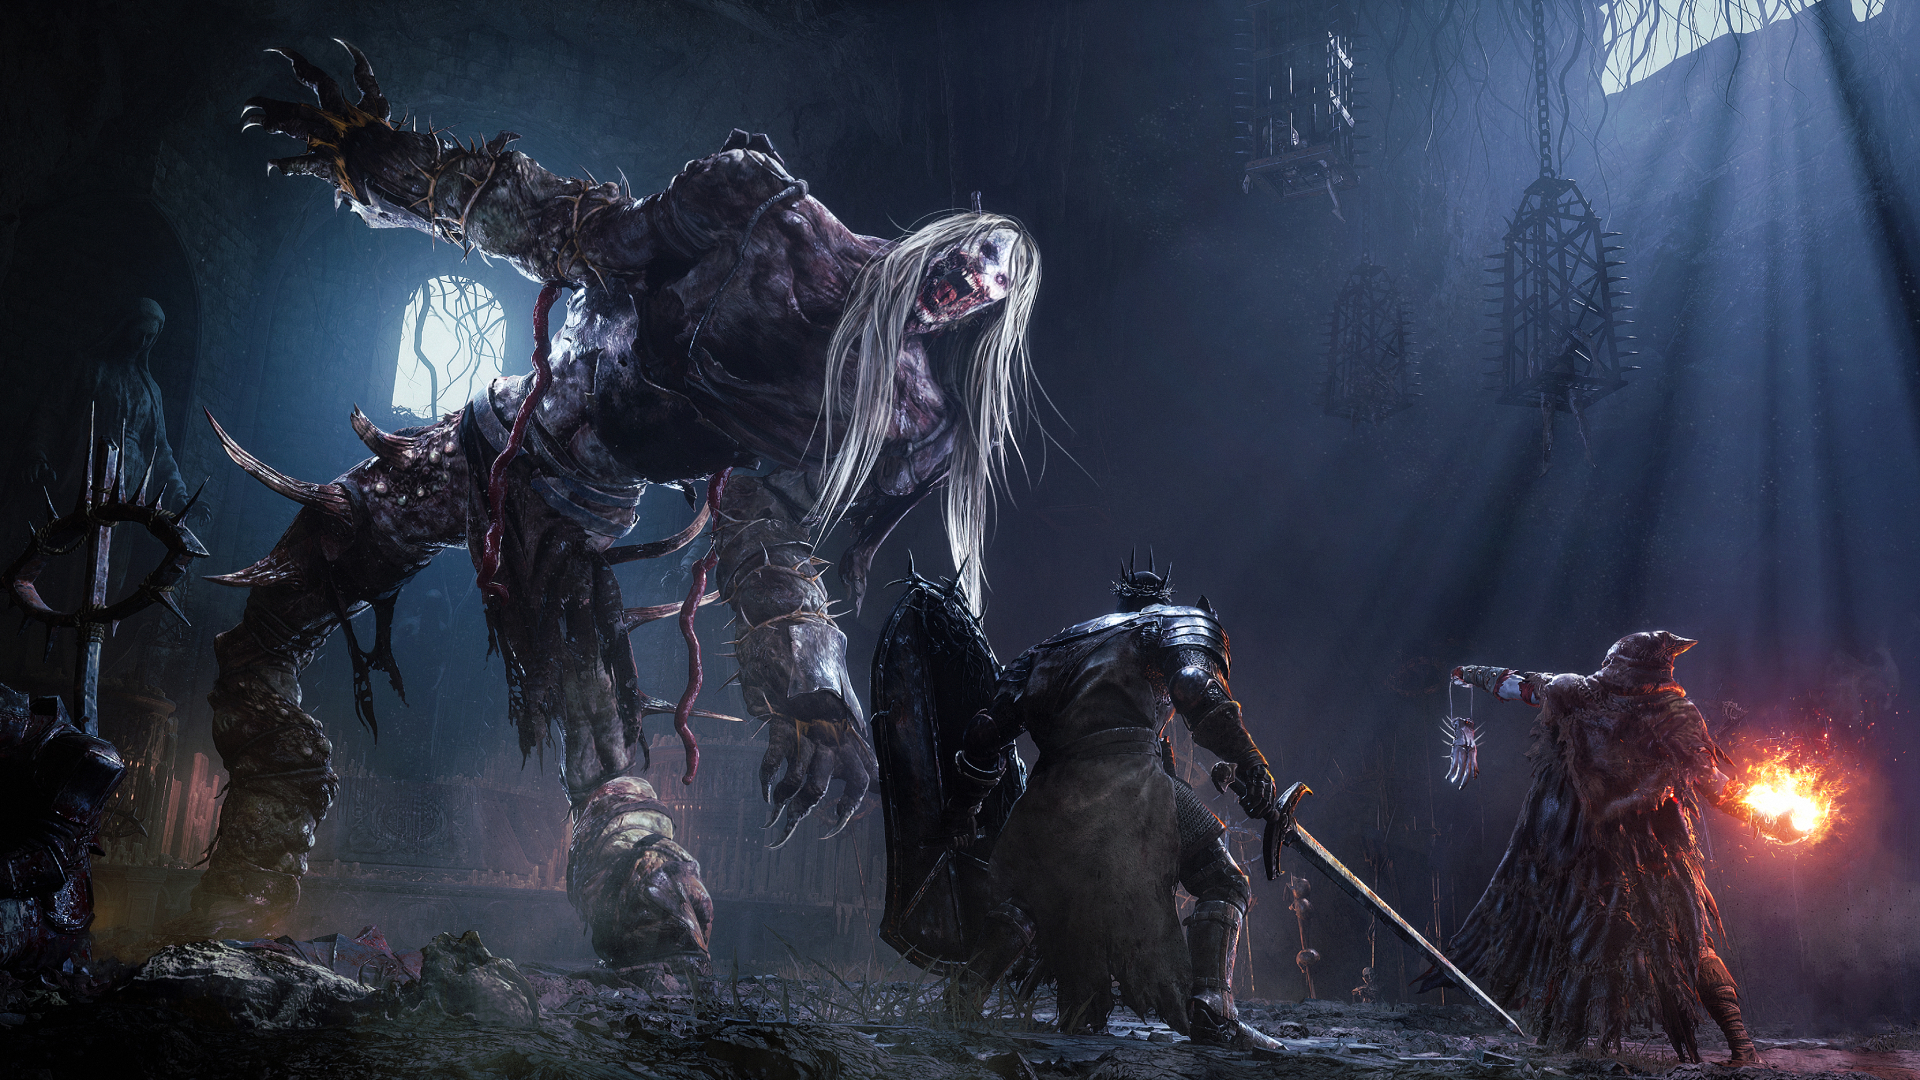 Lords of the Fallen Review (PC)